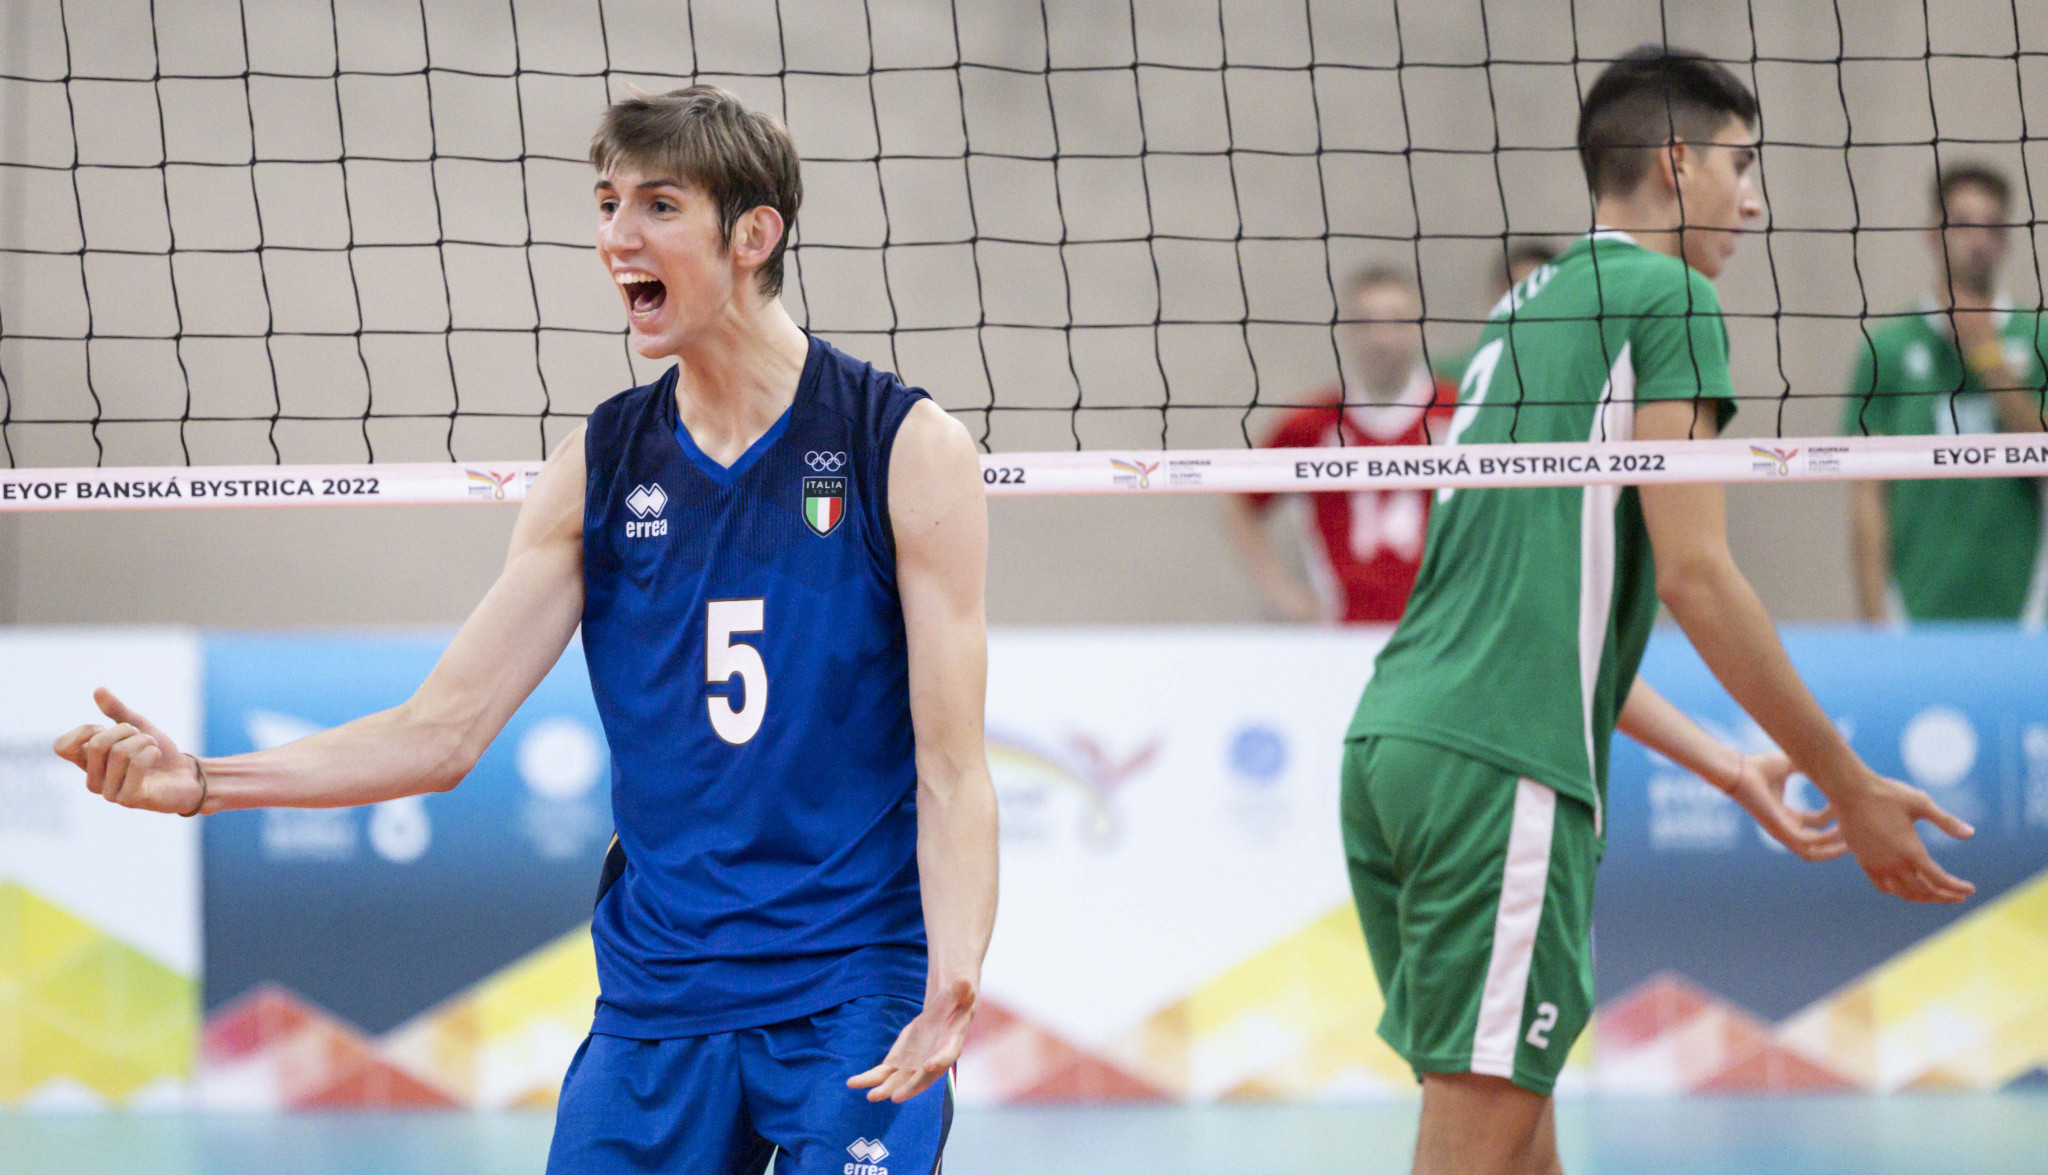 Italy's boys triumphed in the volleyball final 3-0 against Bulgaria ©EYOF Banská Bystrica 2022